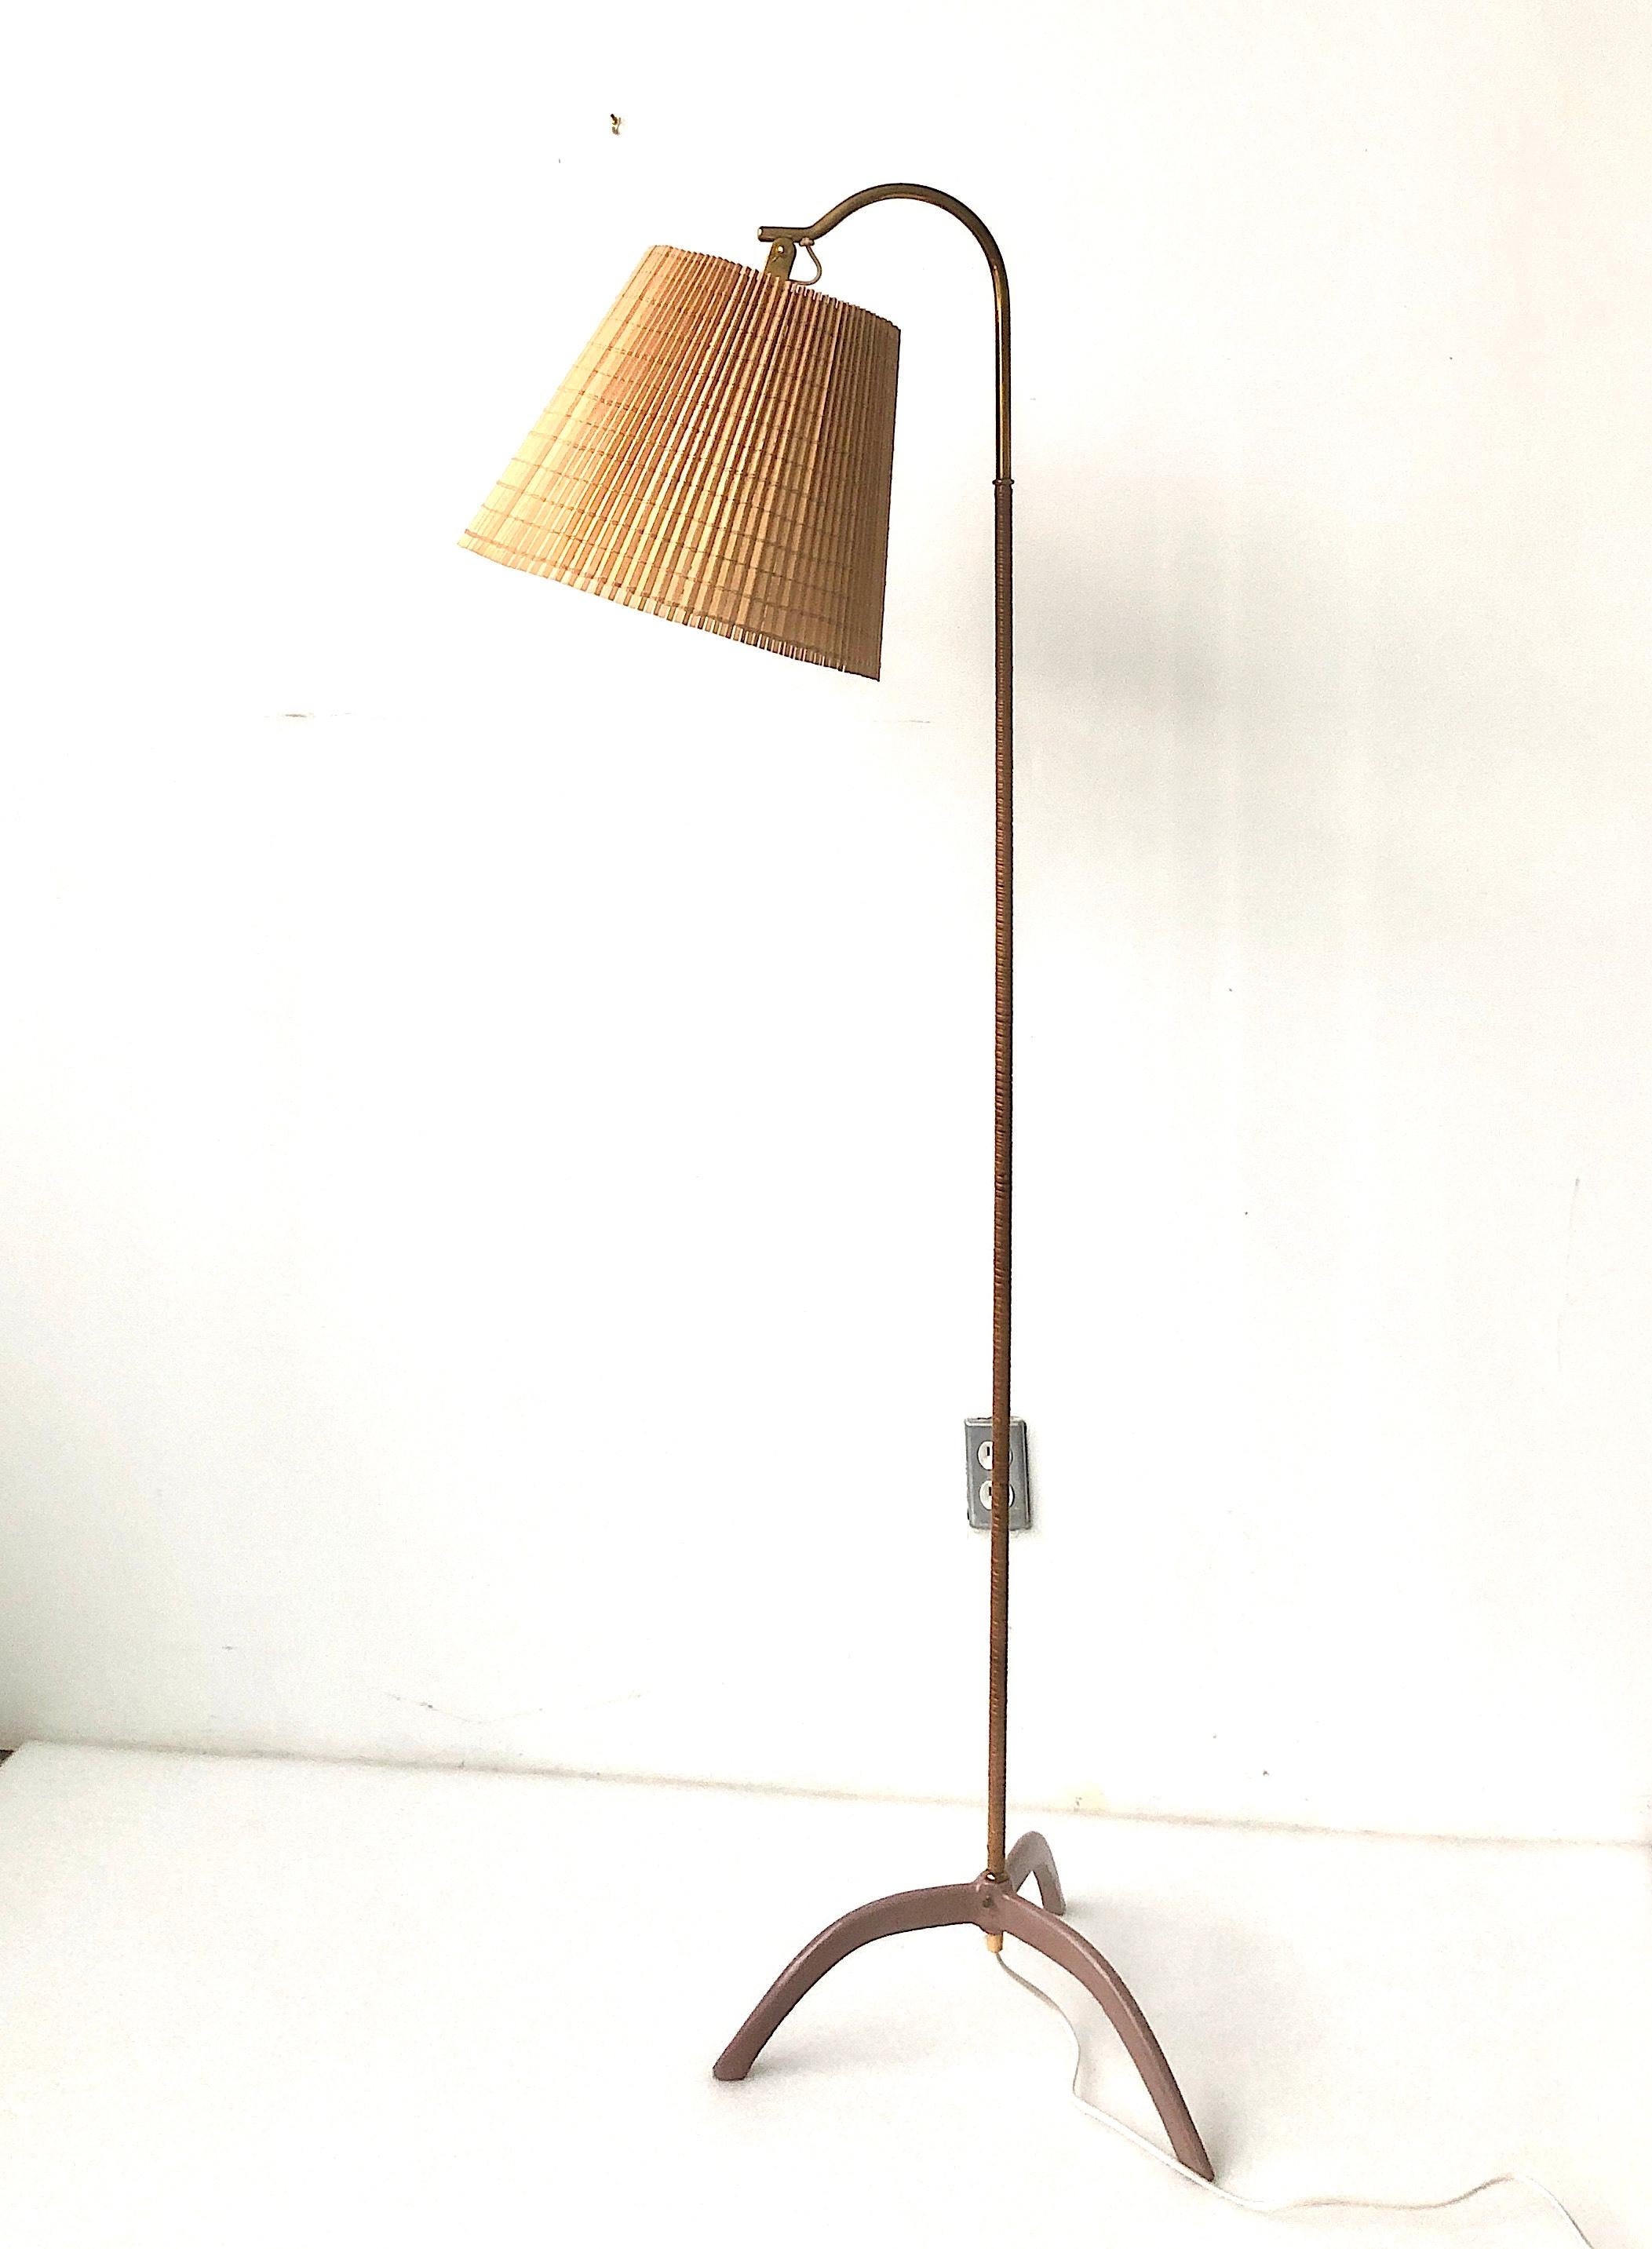 Scandinavian Modern Floor Lamp by Paavo Tynell Model 9609 / 2 available. For Sale